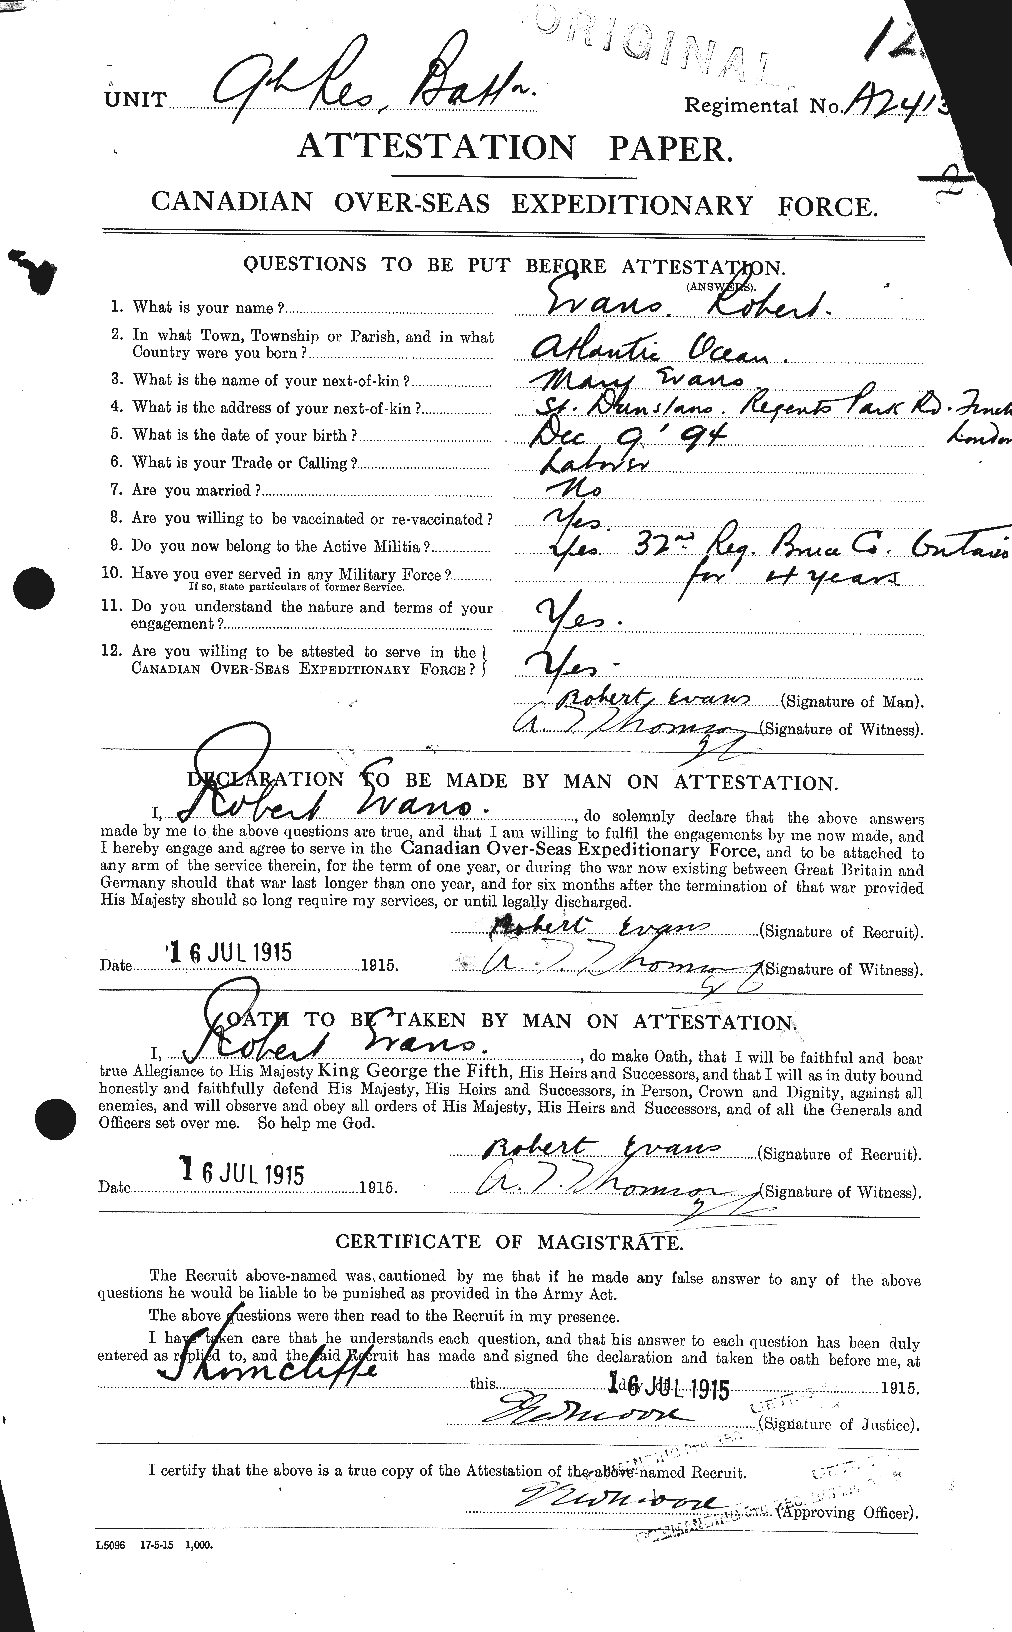 Personnel Records of the First World War - CEF 313284a